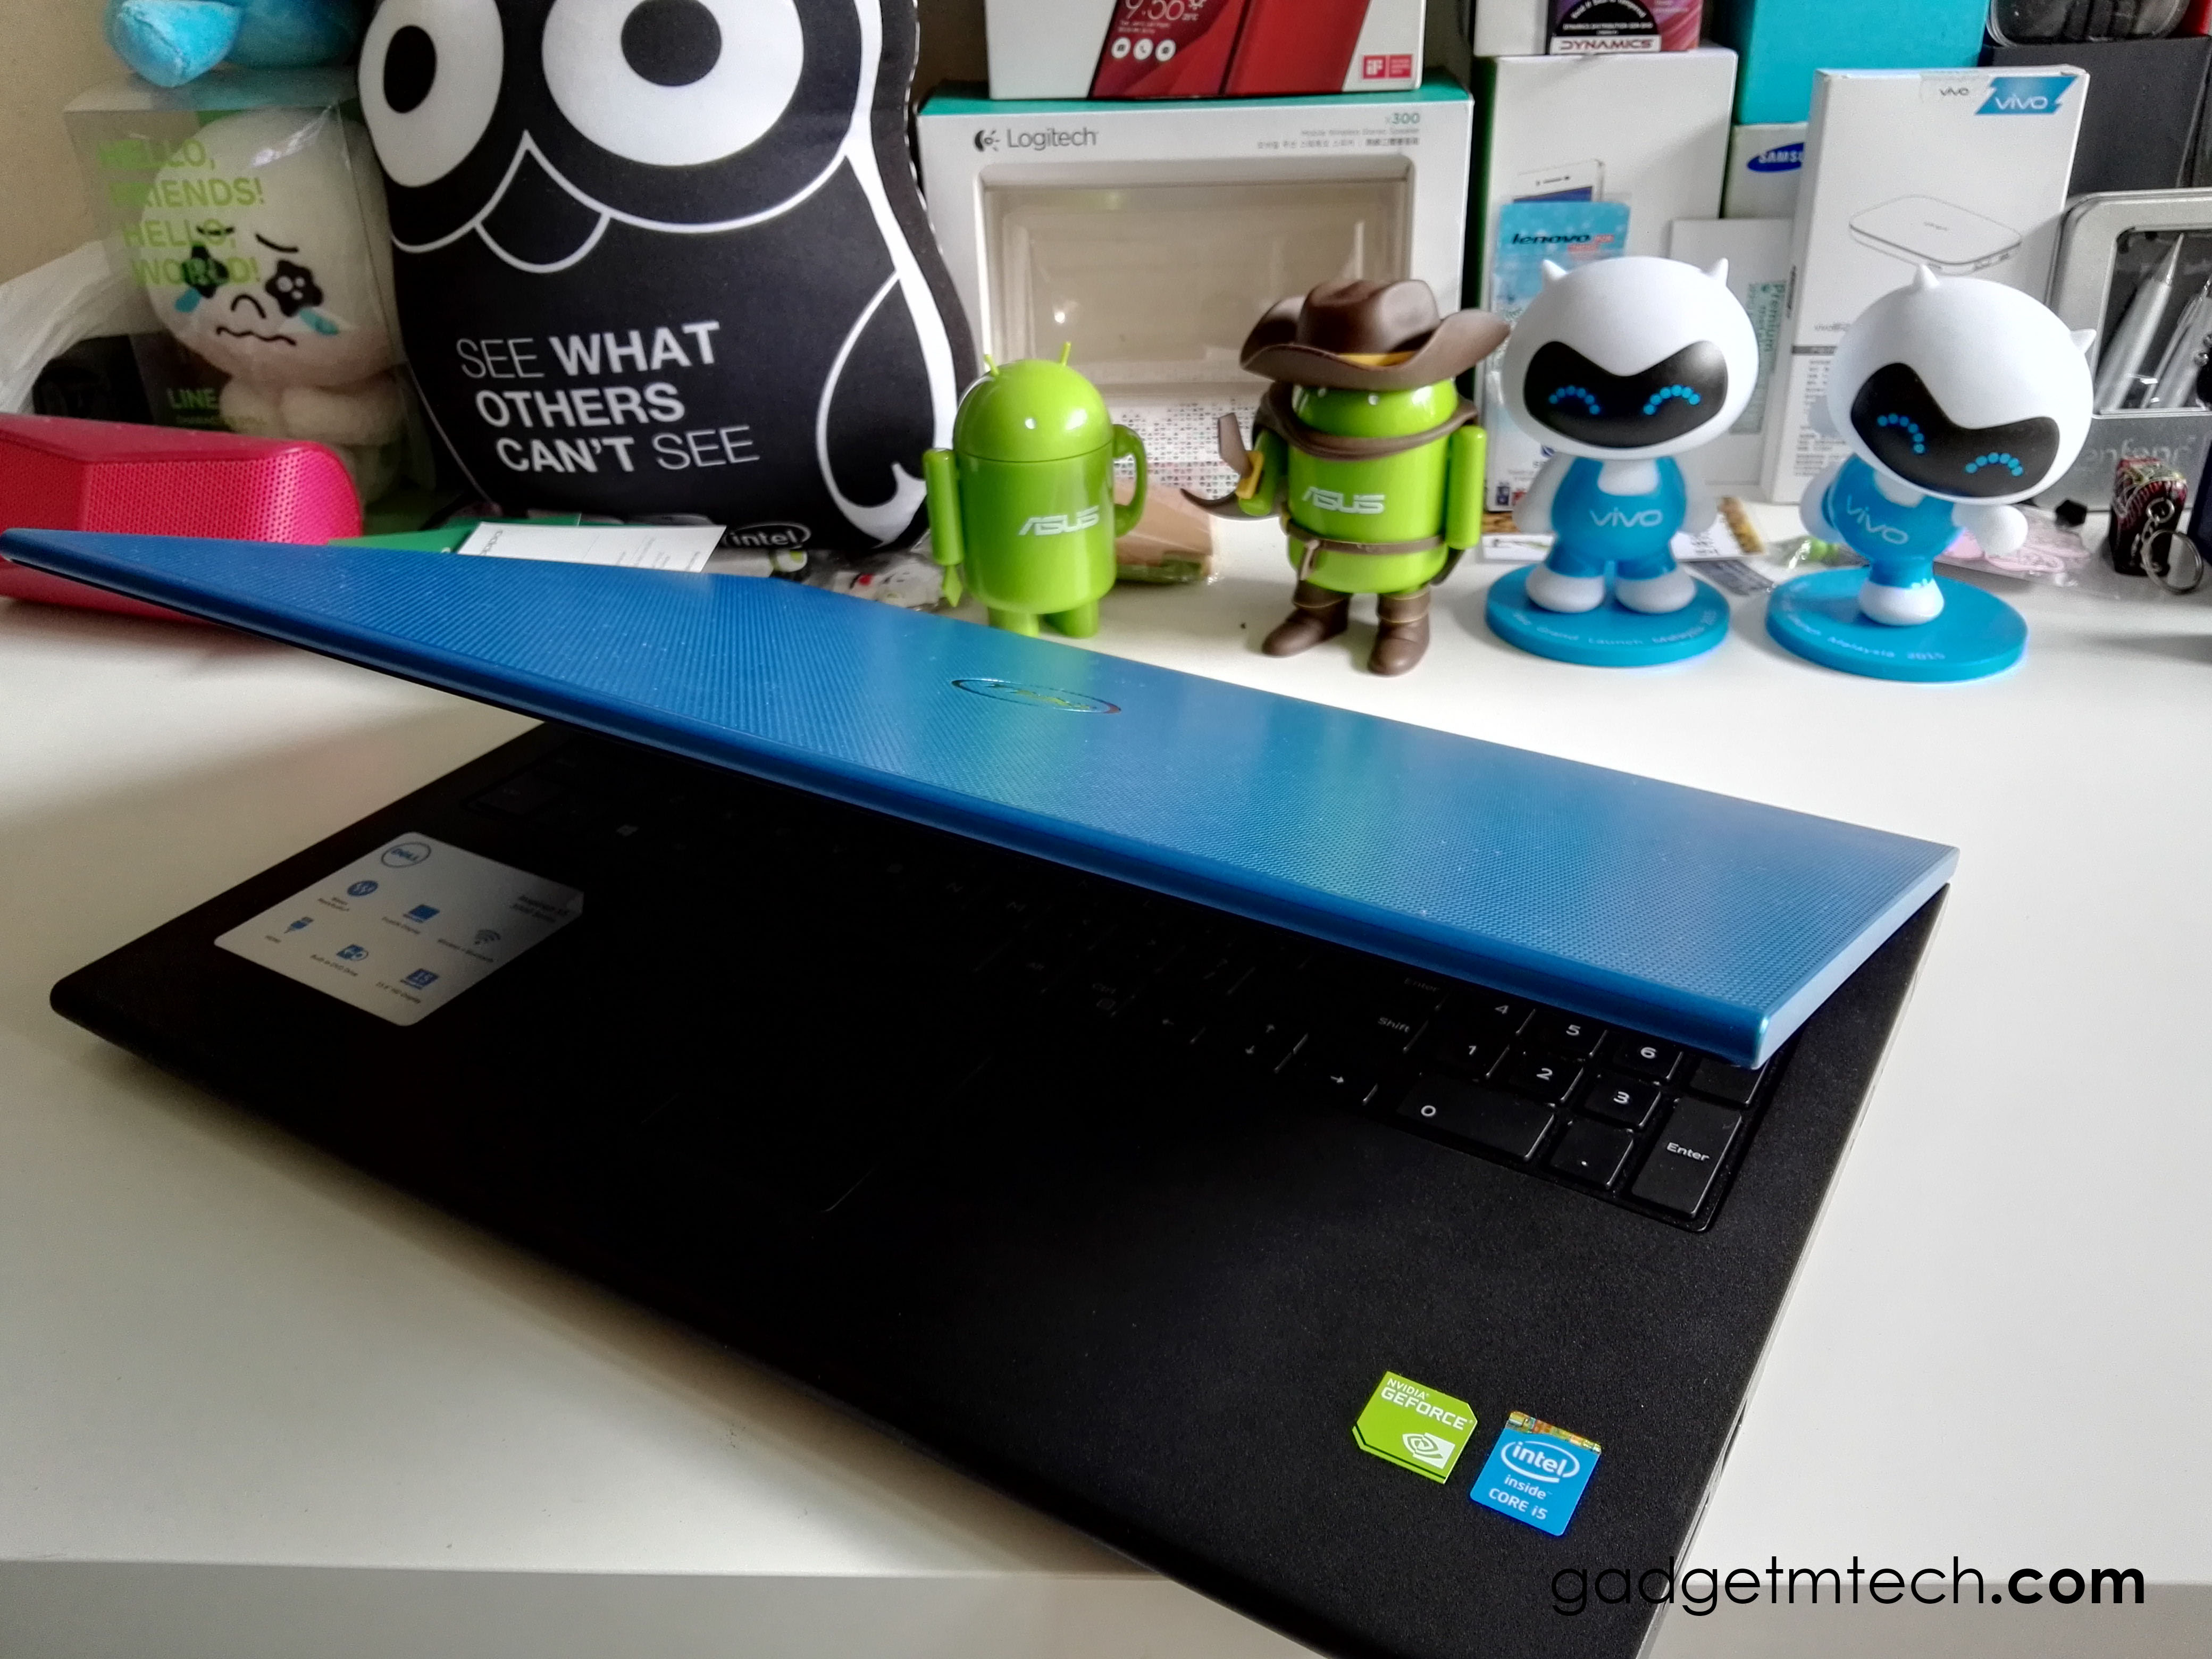 Dell Inspiron 15 3000 Review_1